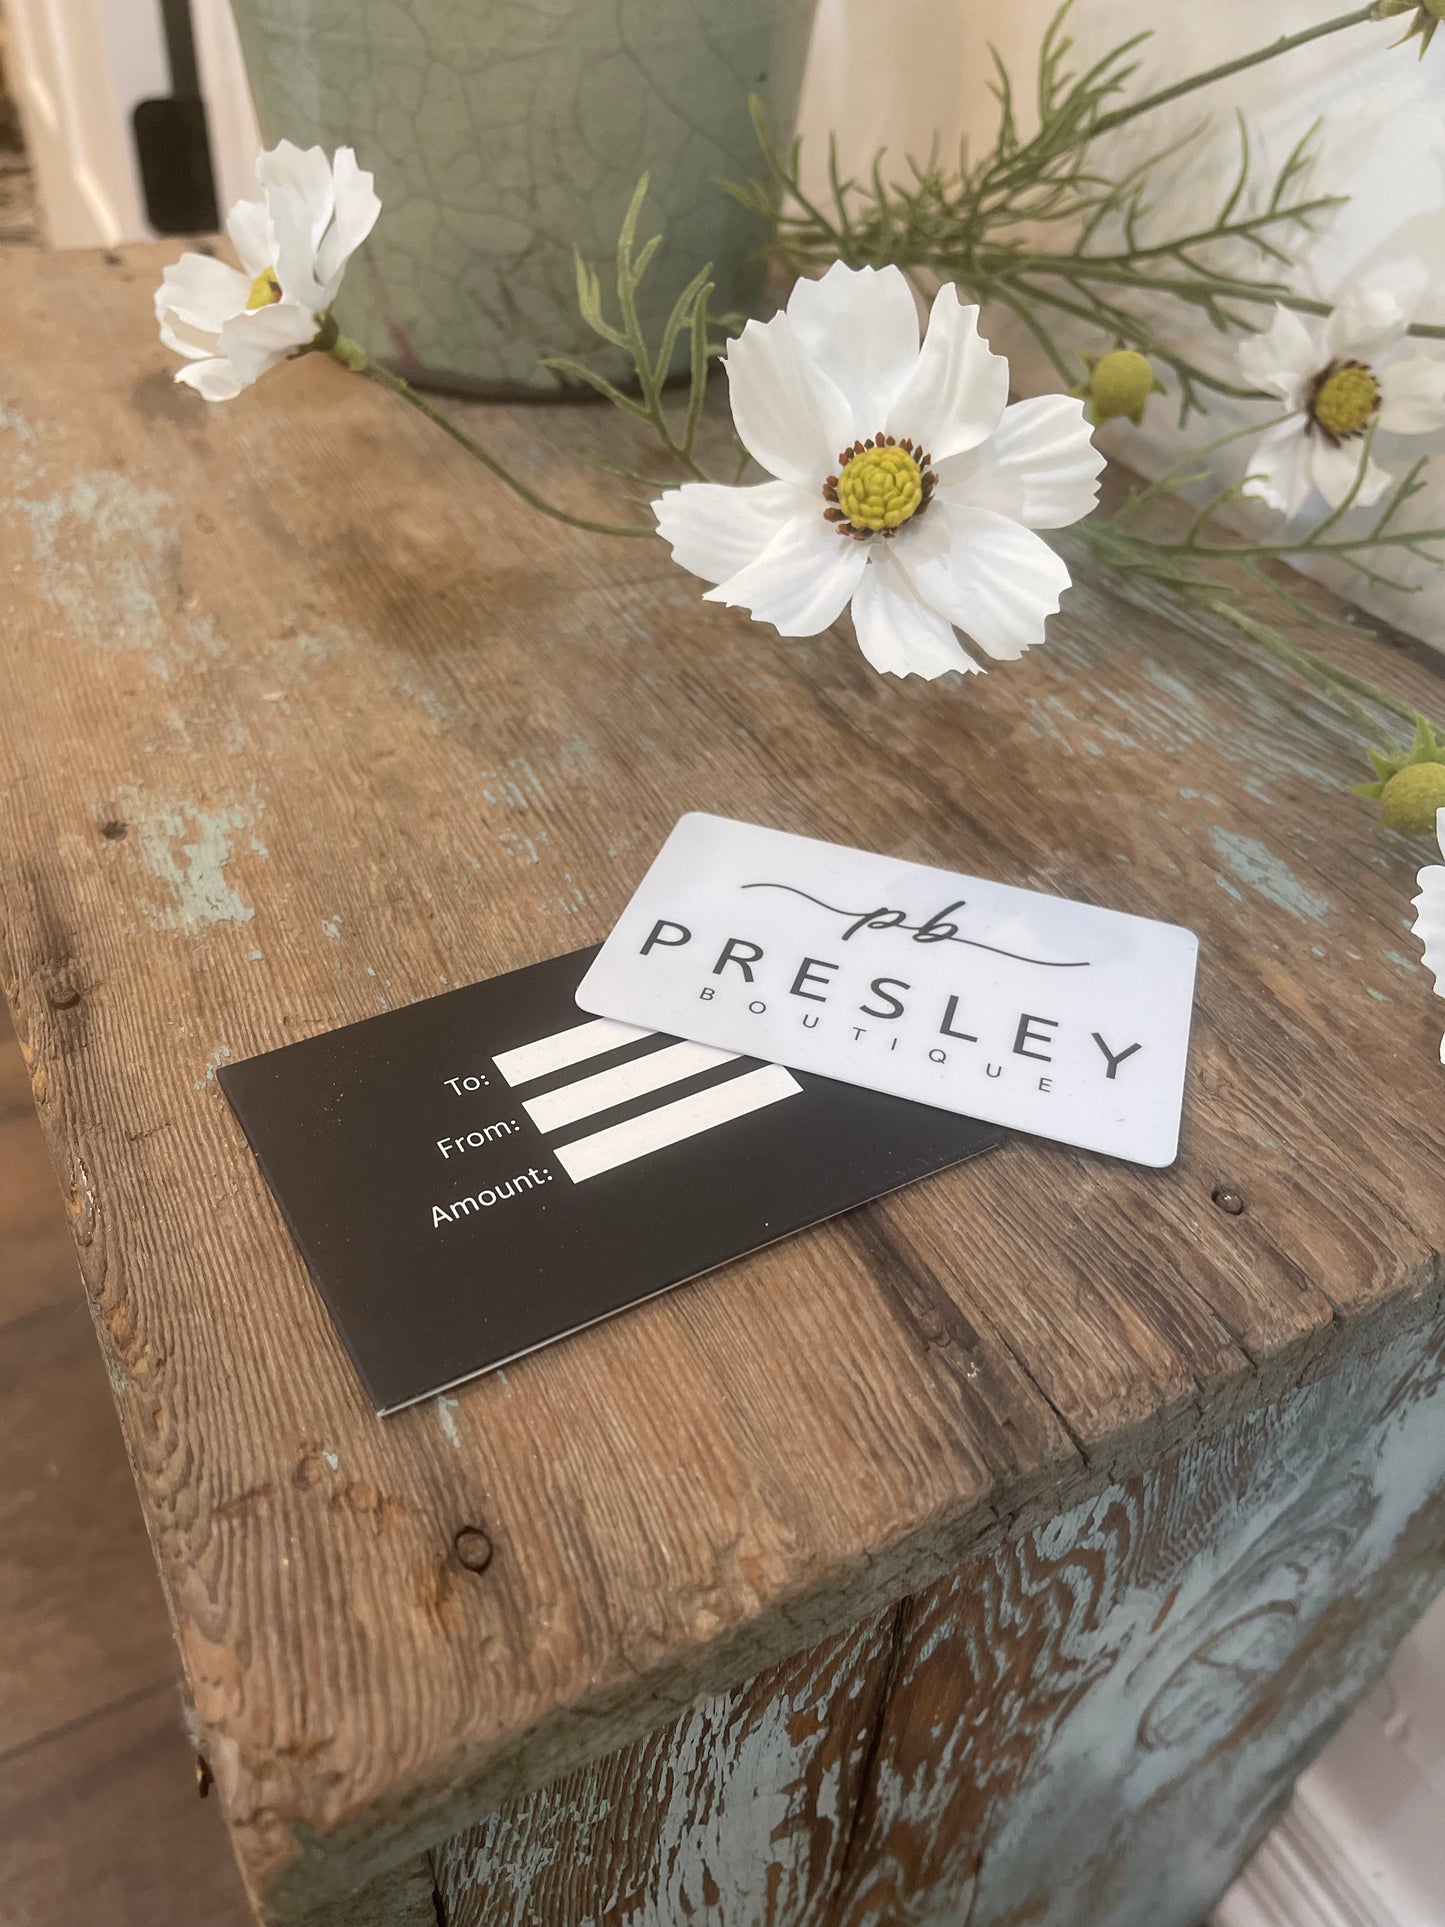 Presley Boutique Gift Cards